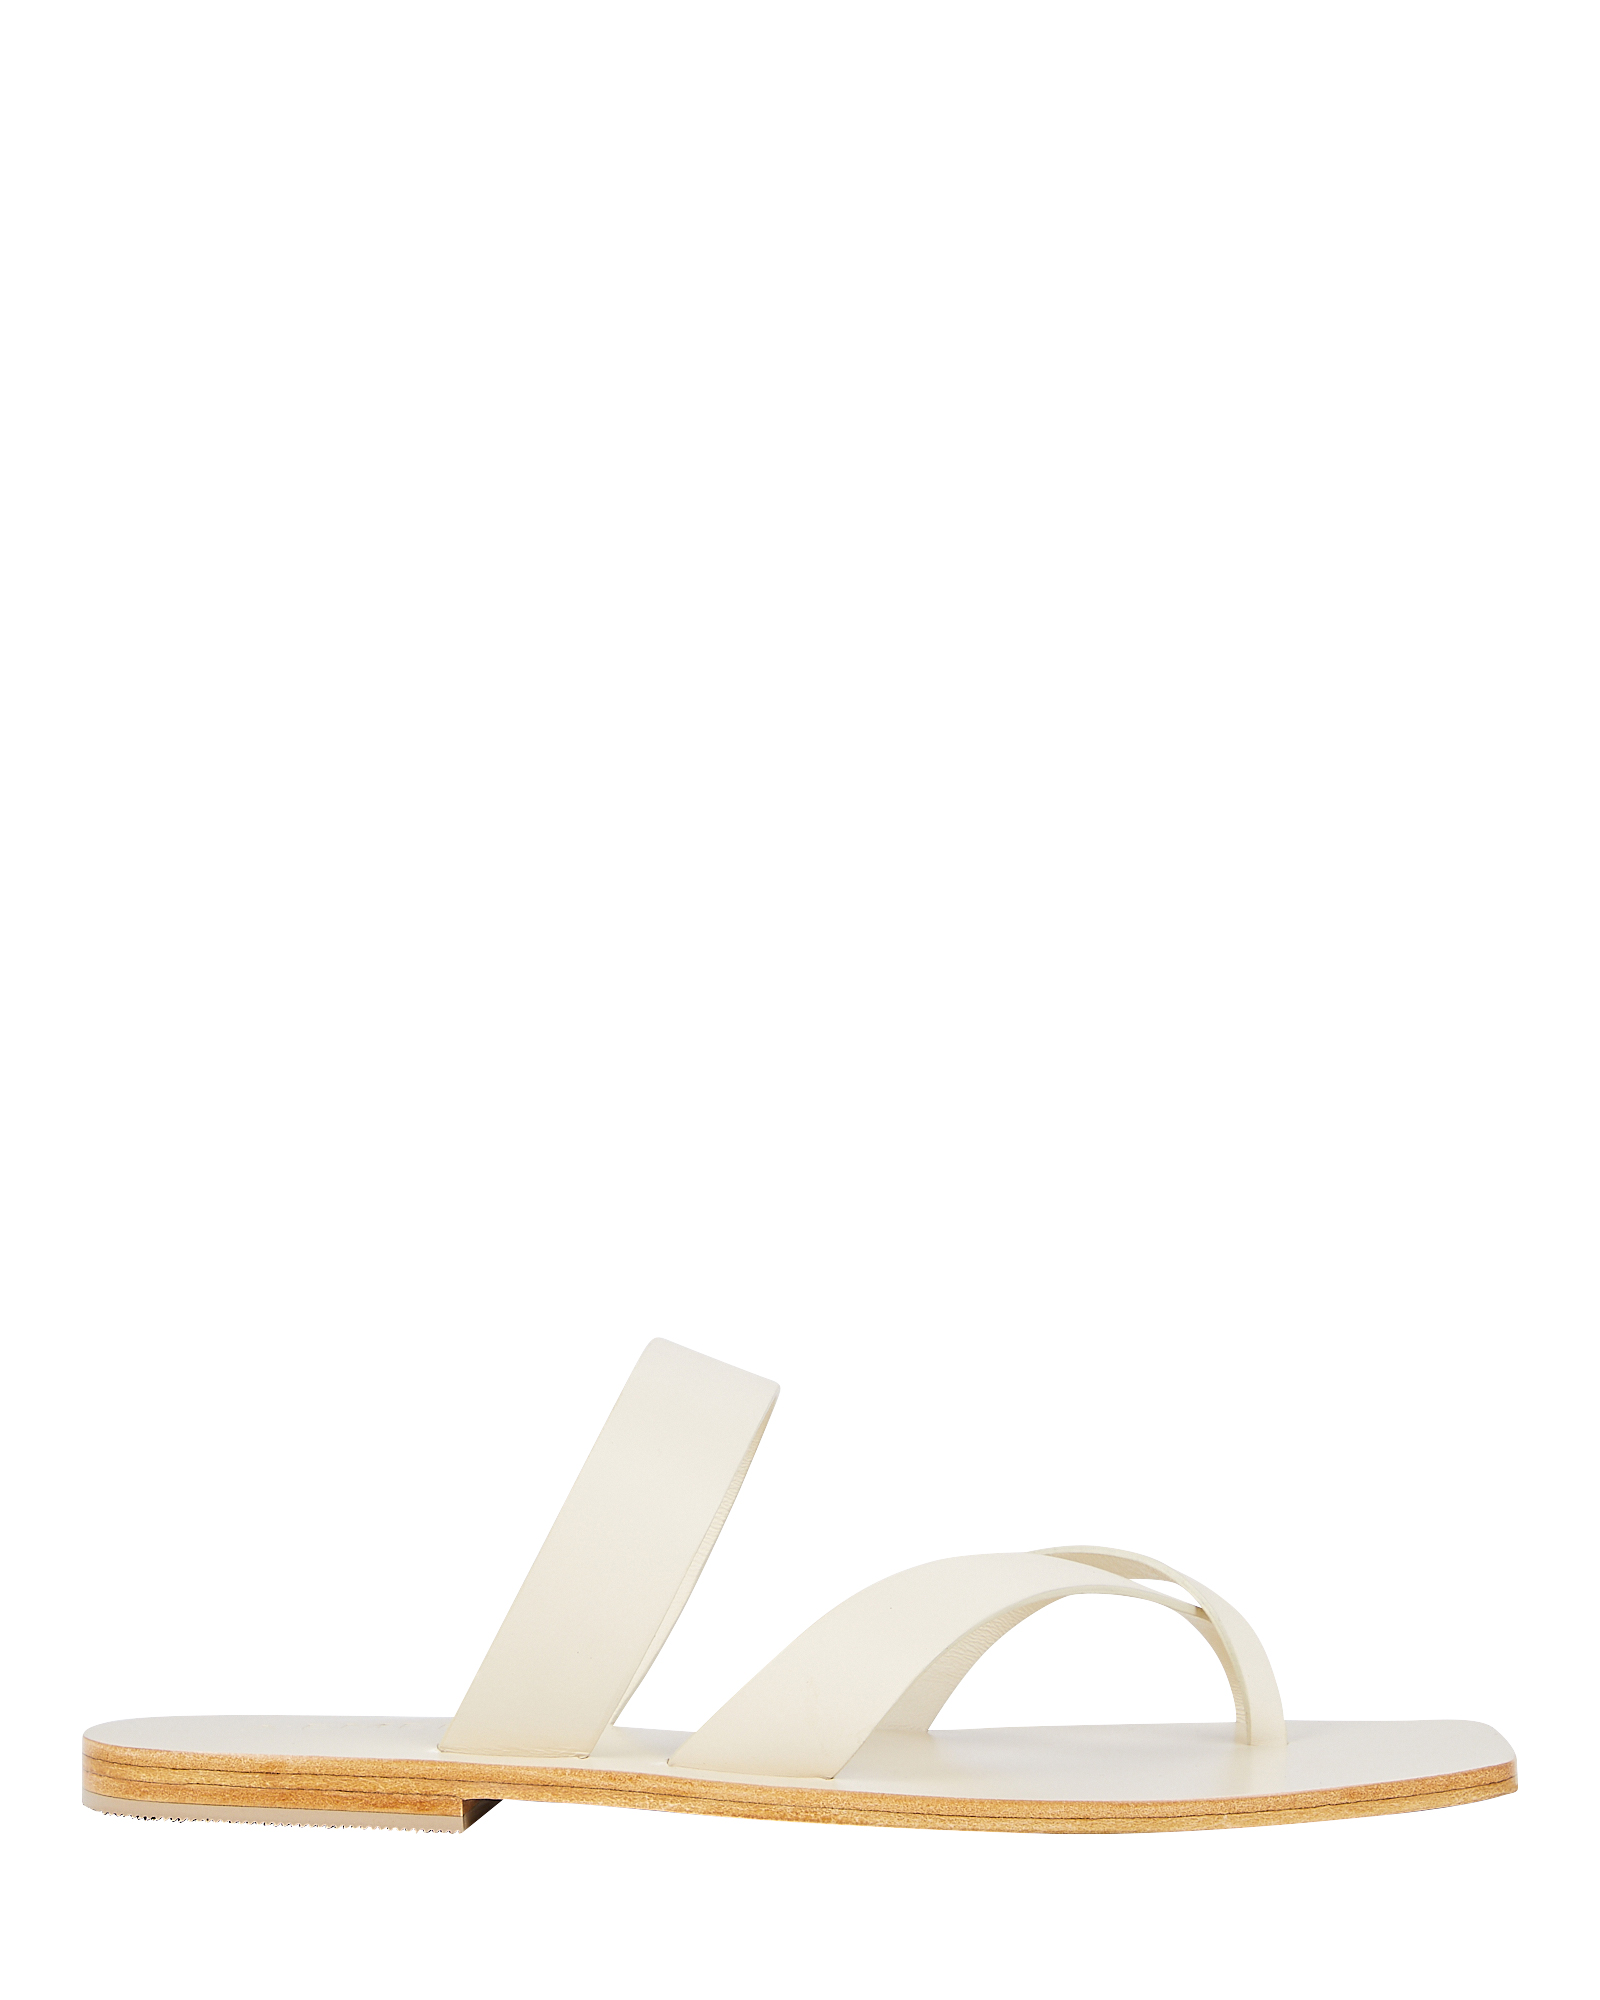 A.EMERY CARTER LEATHER SLIDE SANDALS